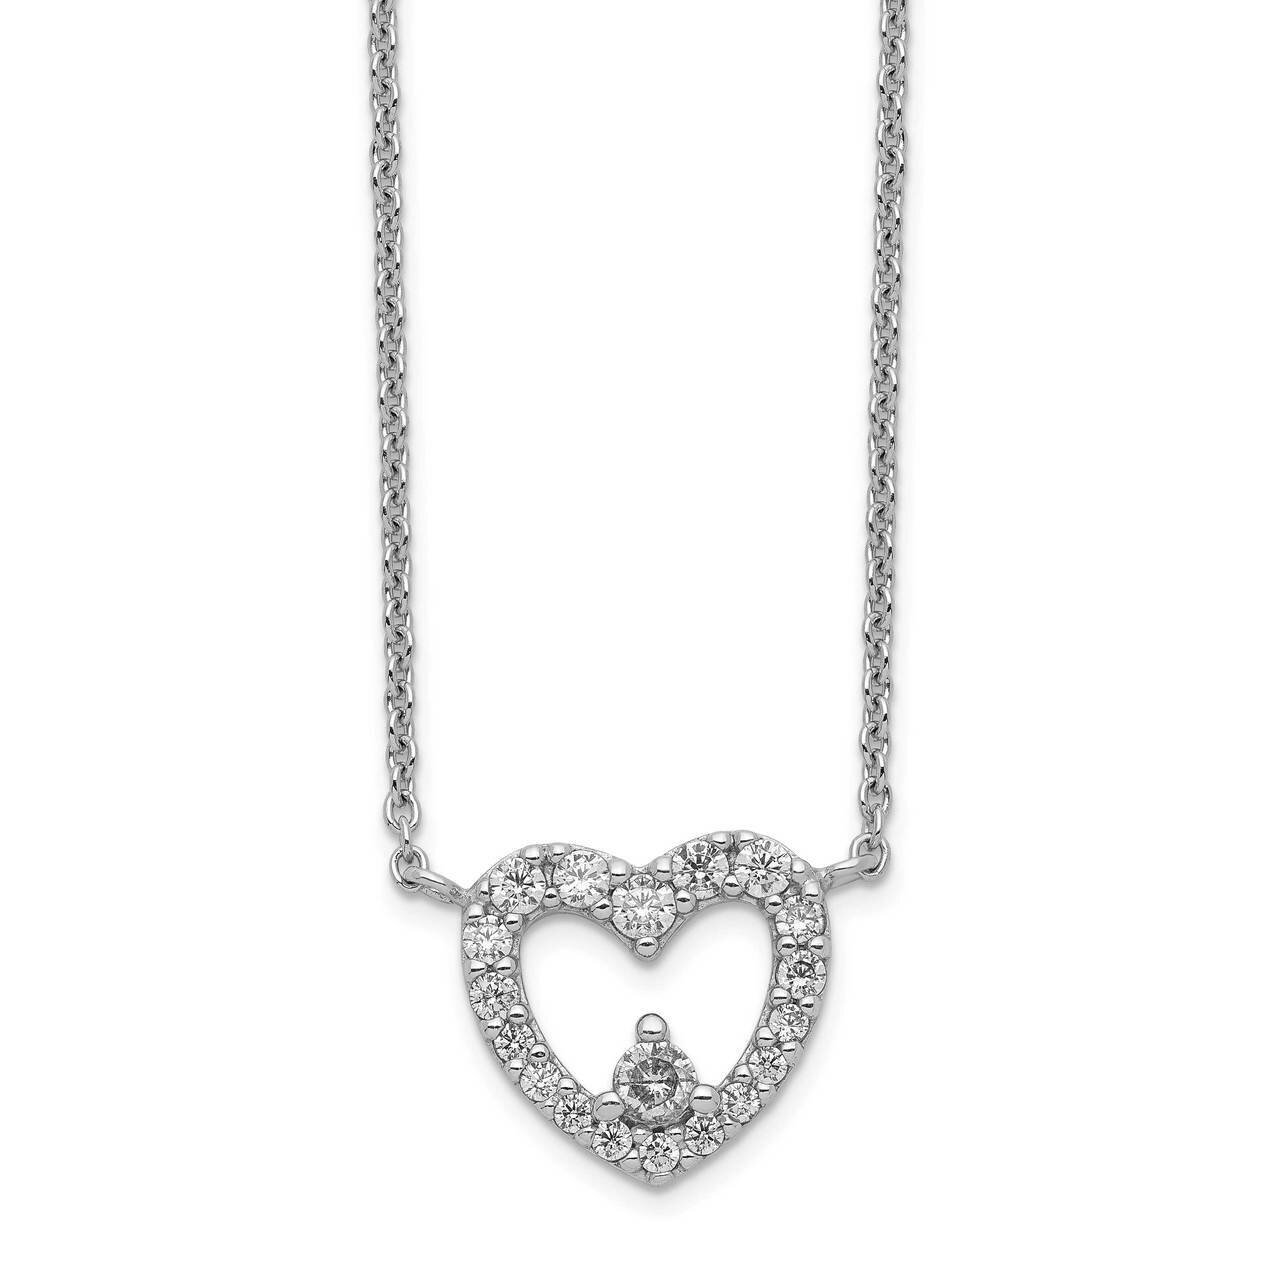 Heart Necklace Sterling Silver Rhodium Plated CZ Diamond QG5389-17.5